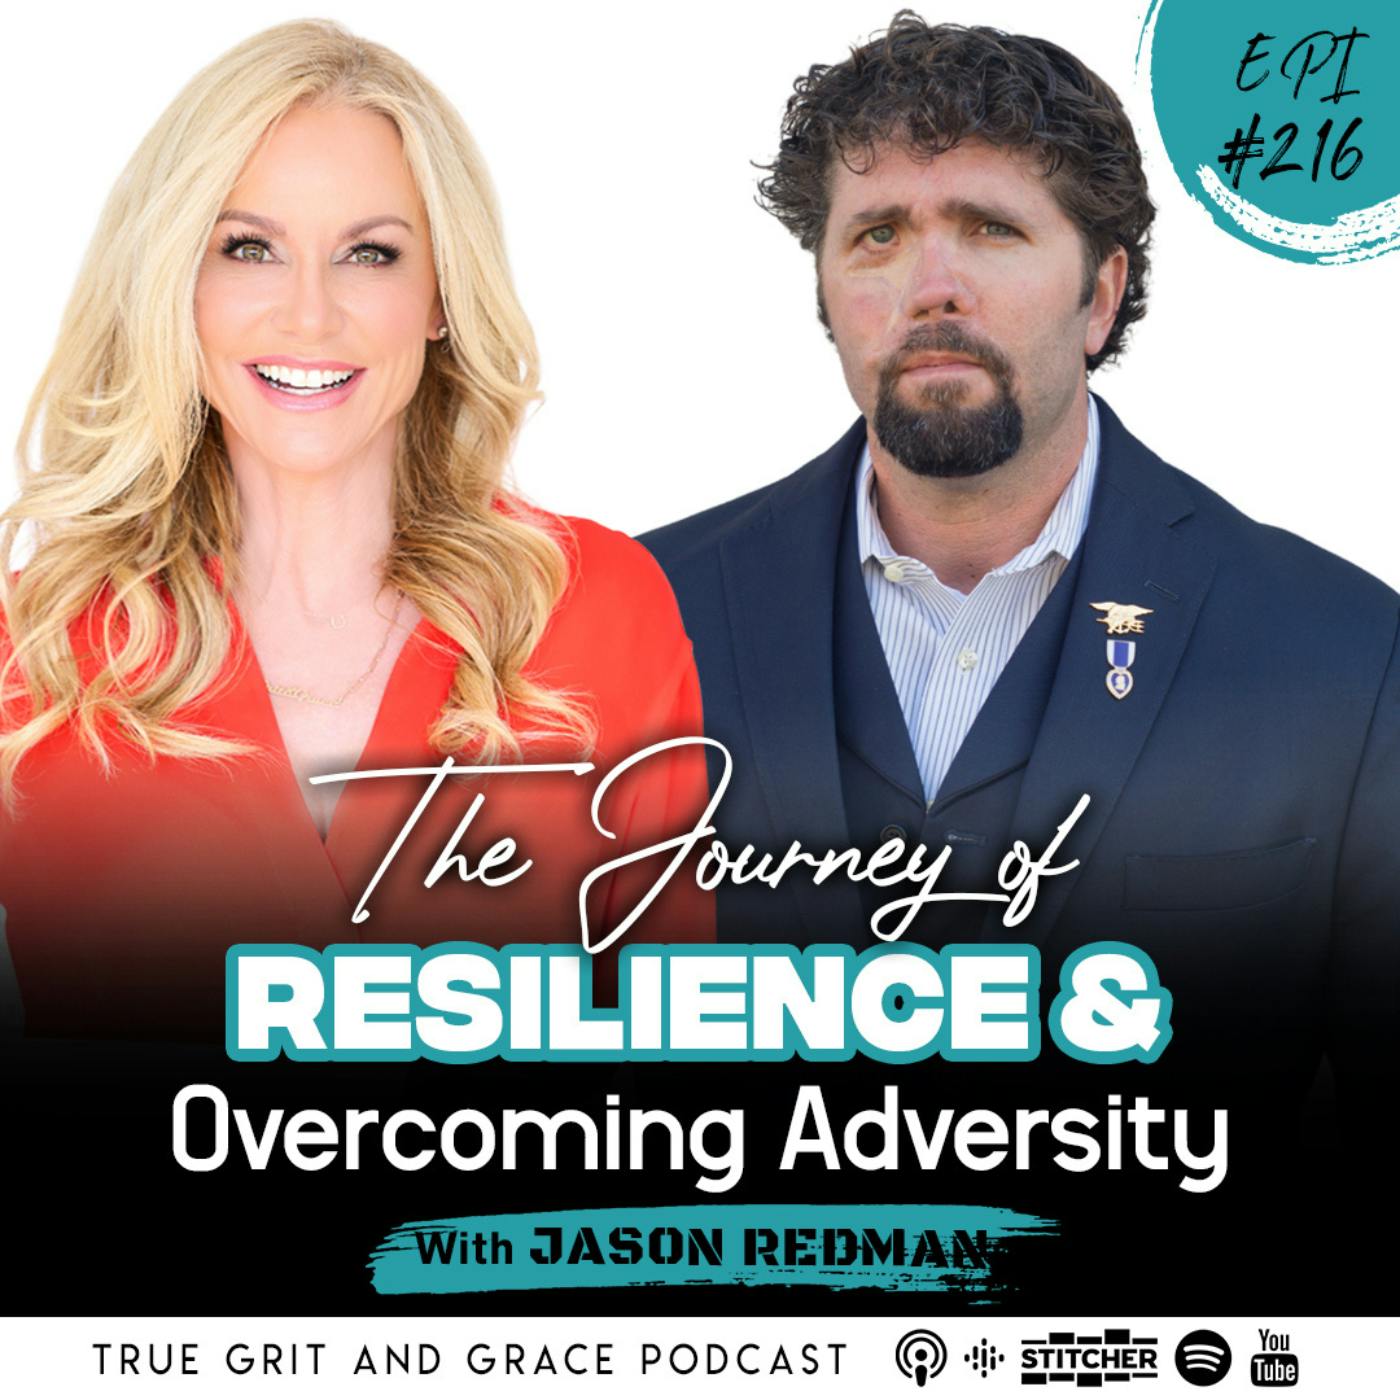 The Journey of Resilience and Overcoming Adversity with Jason Redman